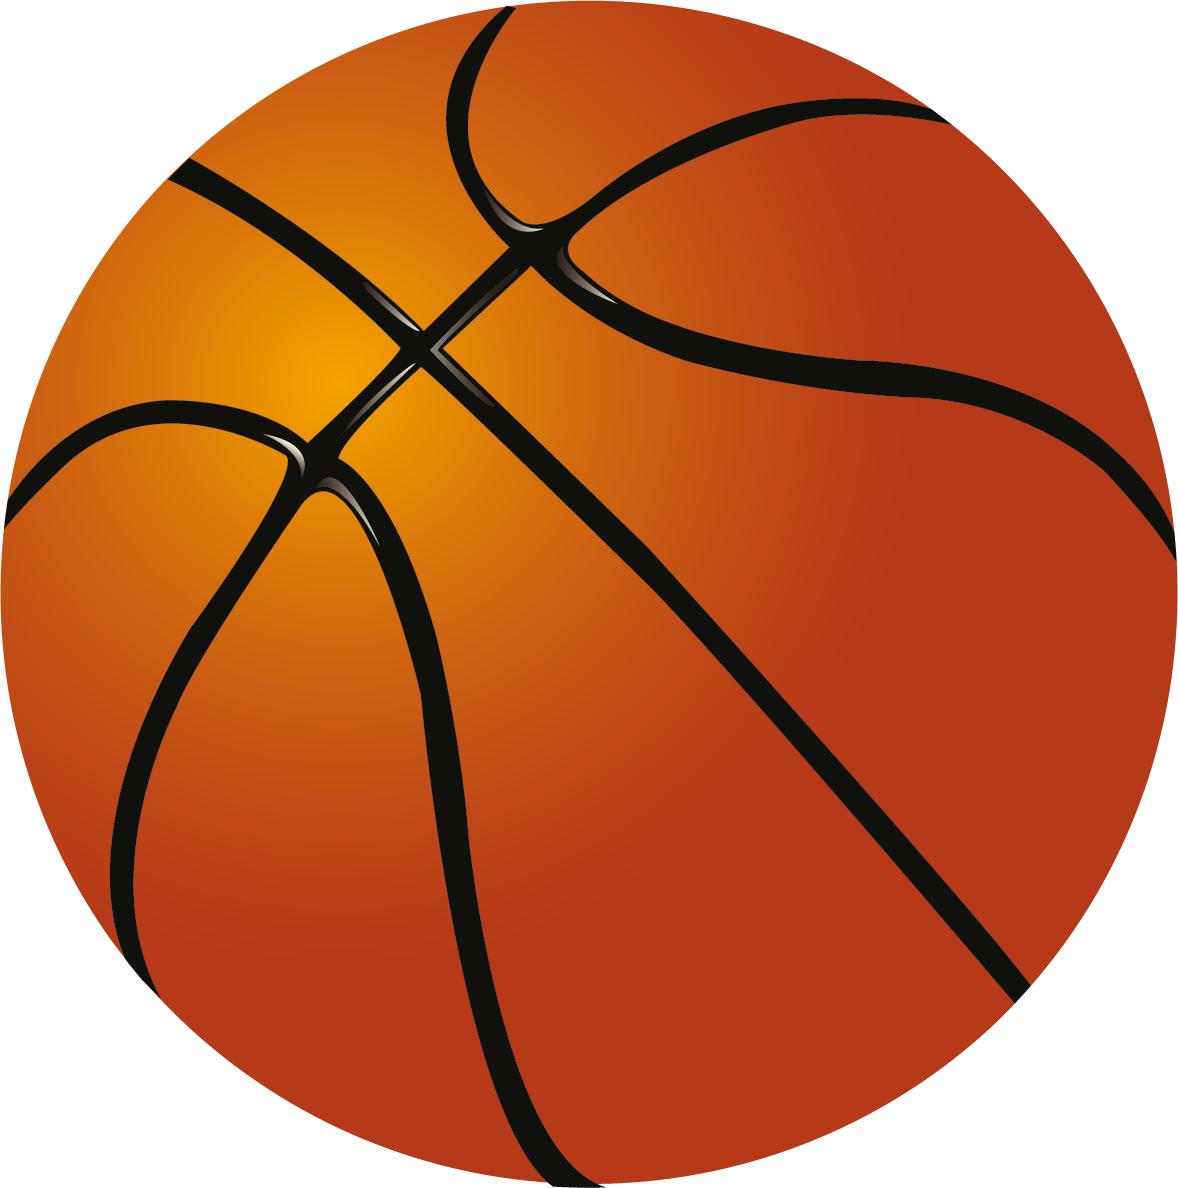 Panda free images recipes. Words clipart basketball